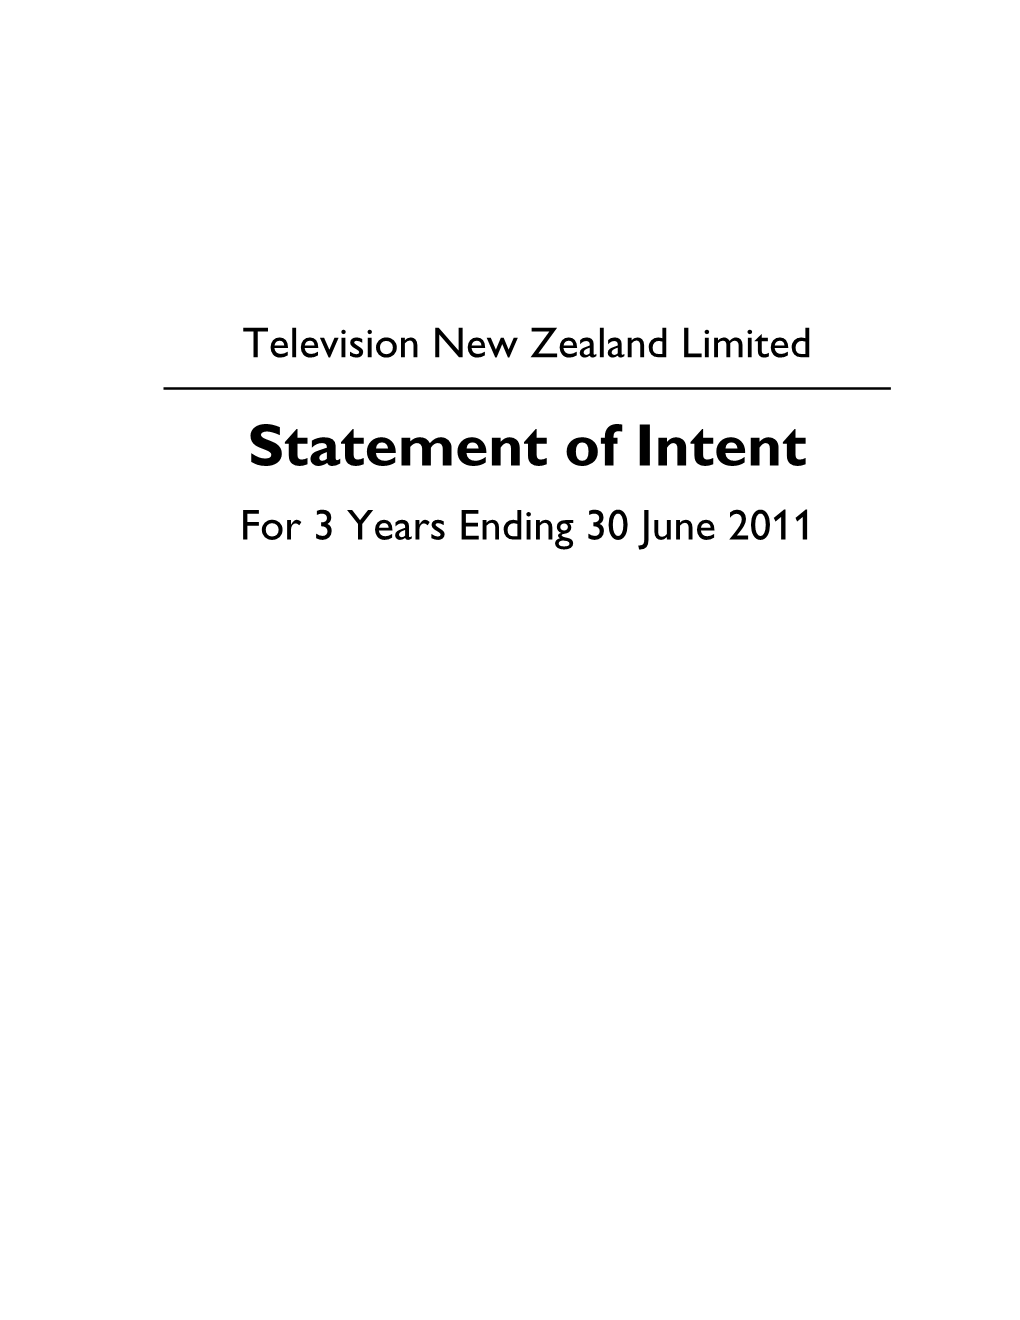 Television New Zealand Limited Statement of Intent for 3 Years Ending 30 June 2011